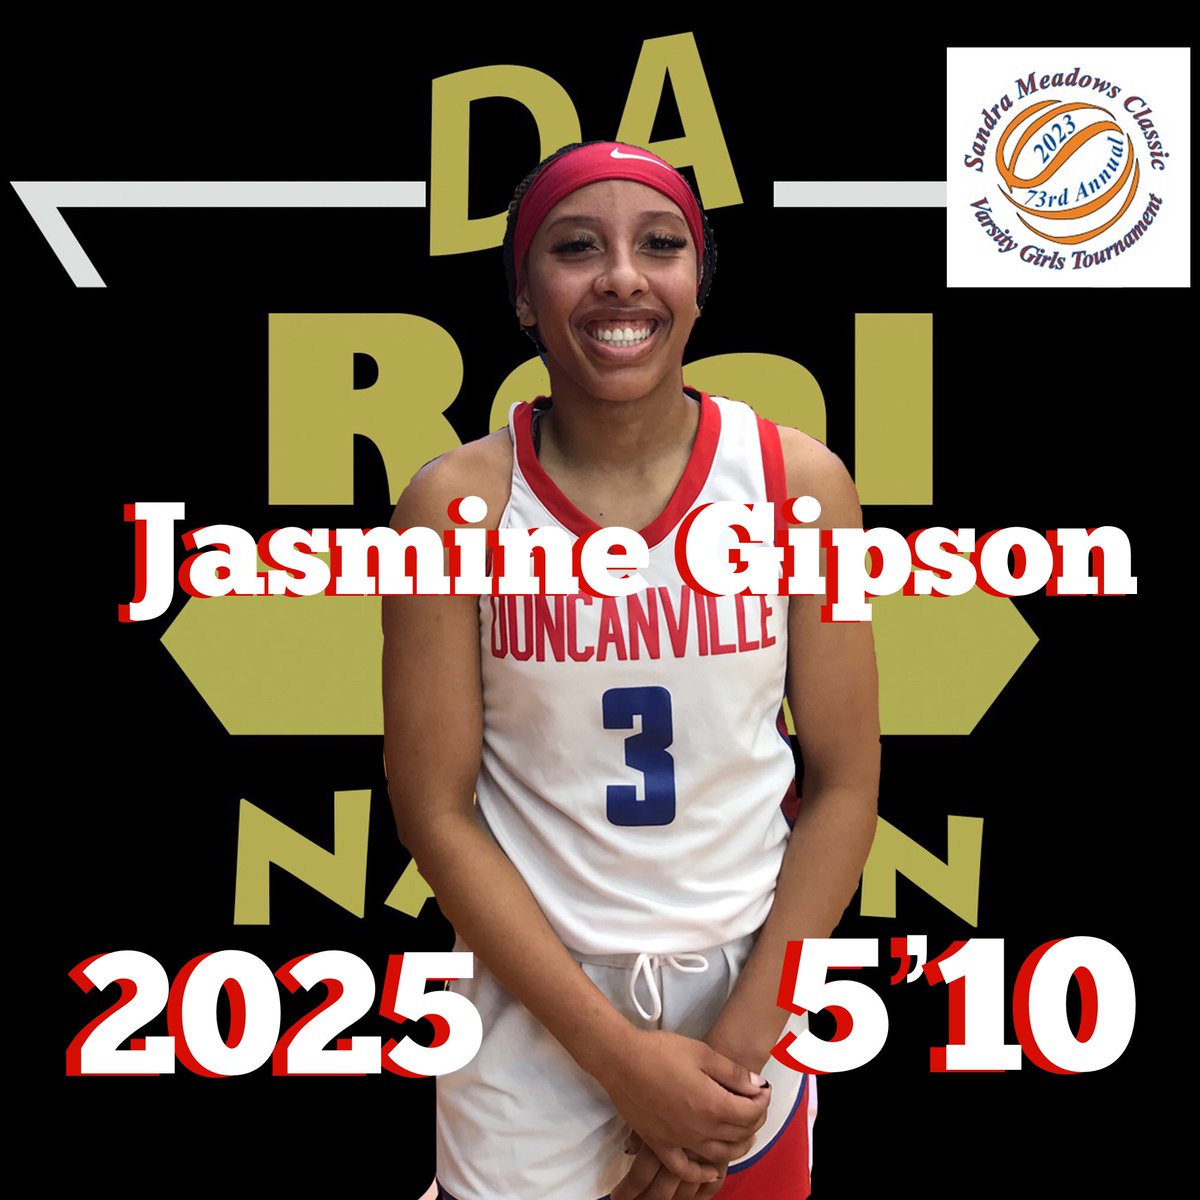 I’M HERE NOW!!! Live n Direct from Duncaville, Tx, its the 73rd Annual Sandra Meadows Classic: @pantherettesbb 2025 guard @JasmineG2025, 💪🏽 defender inside/out; 💪🏽skill set; good shooter; ultimate team player that COMPETES like her life’s on the line! #DaREALtallkNation